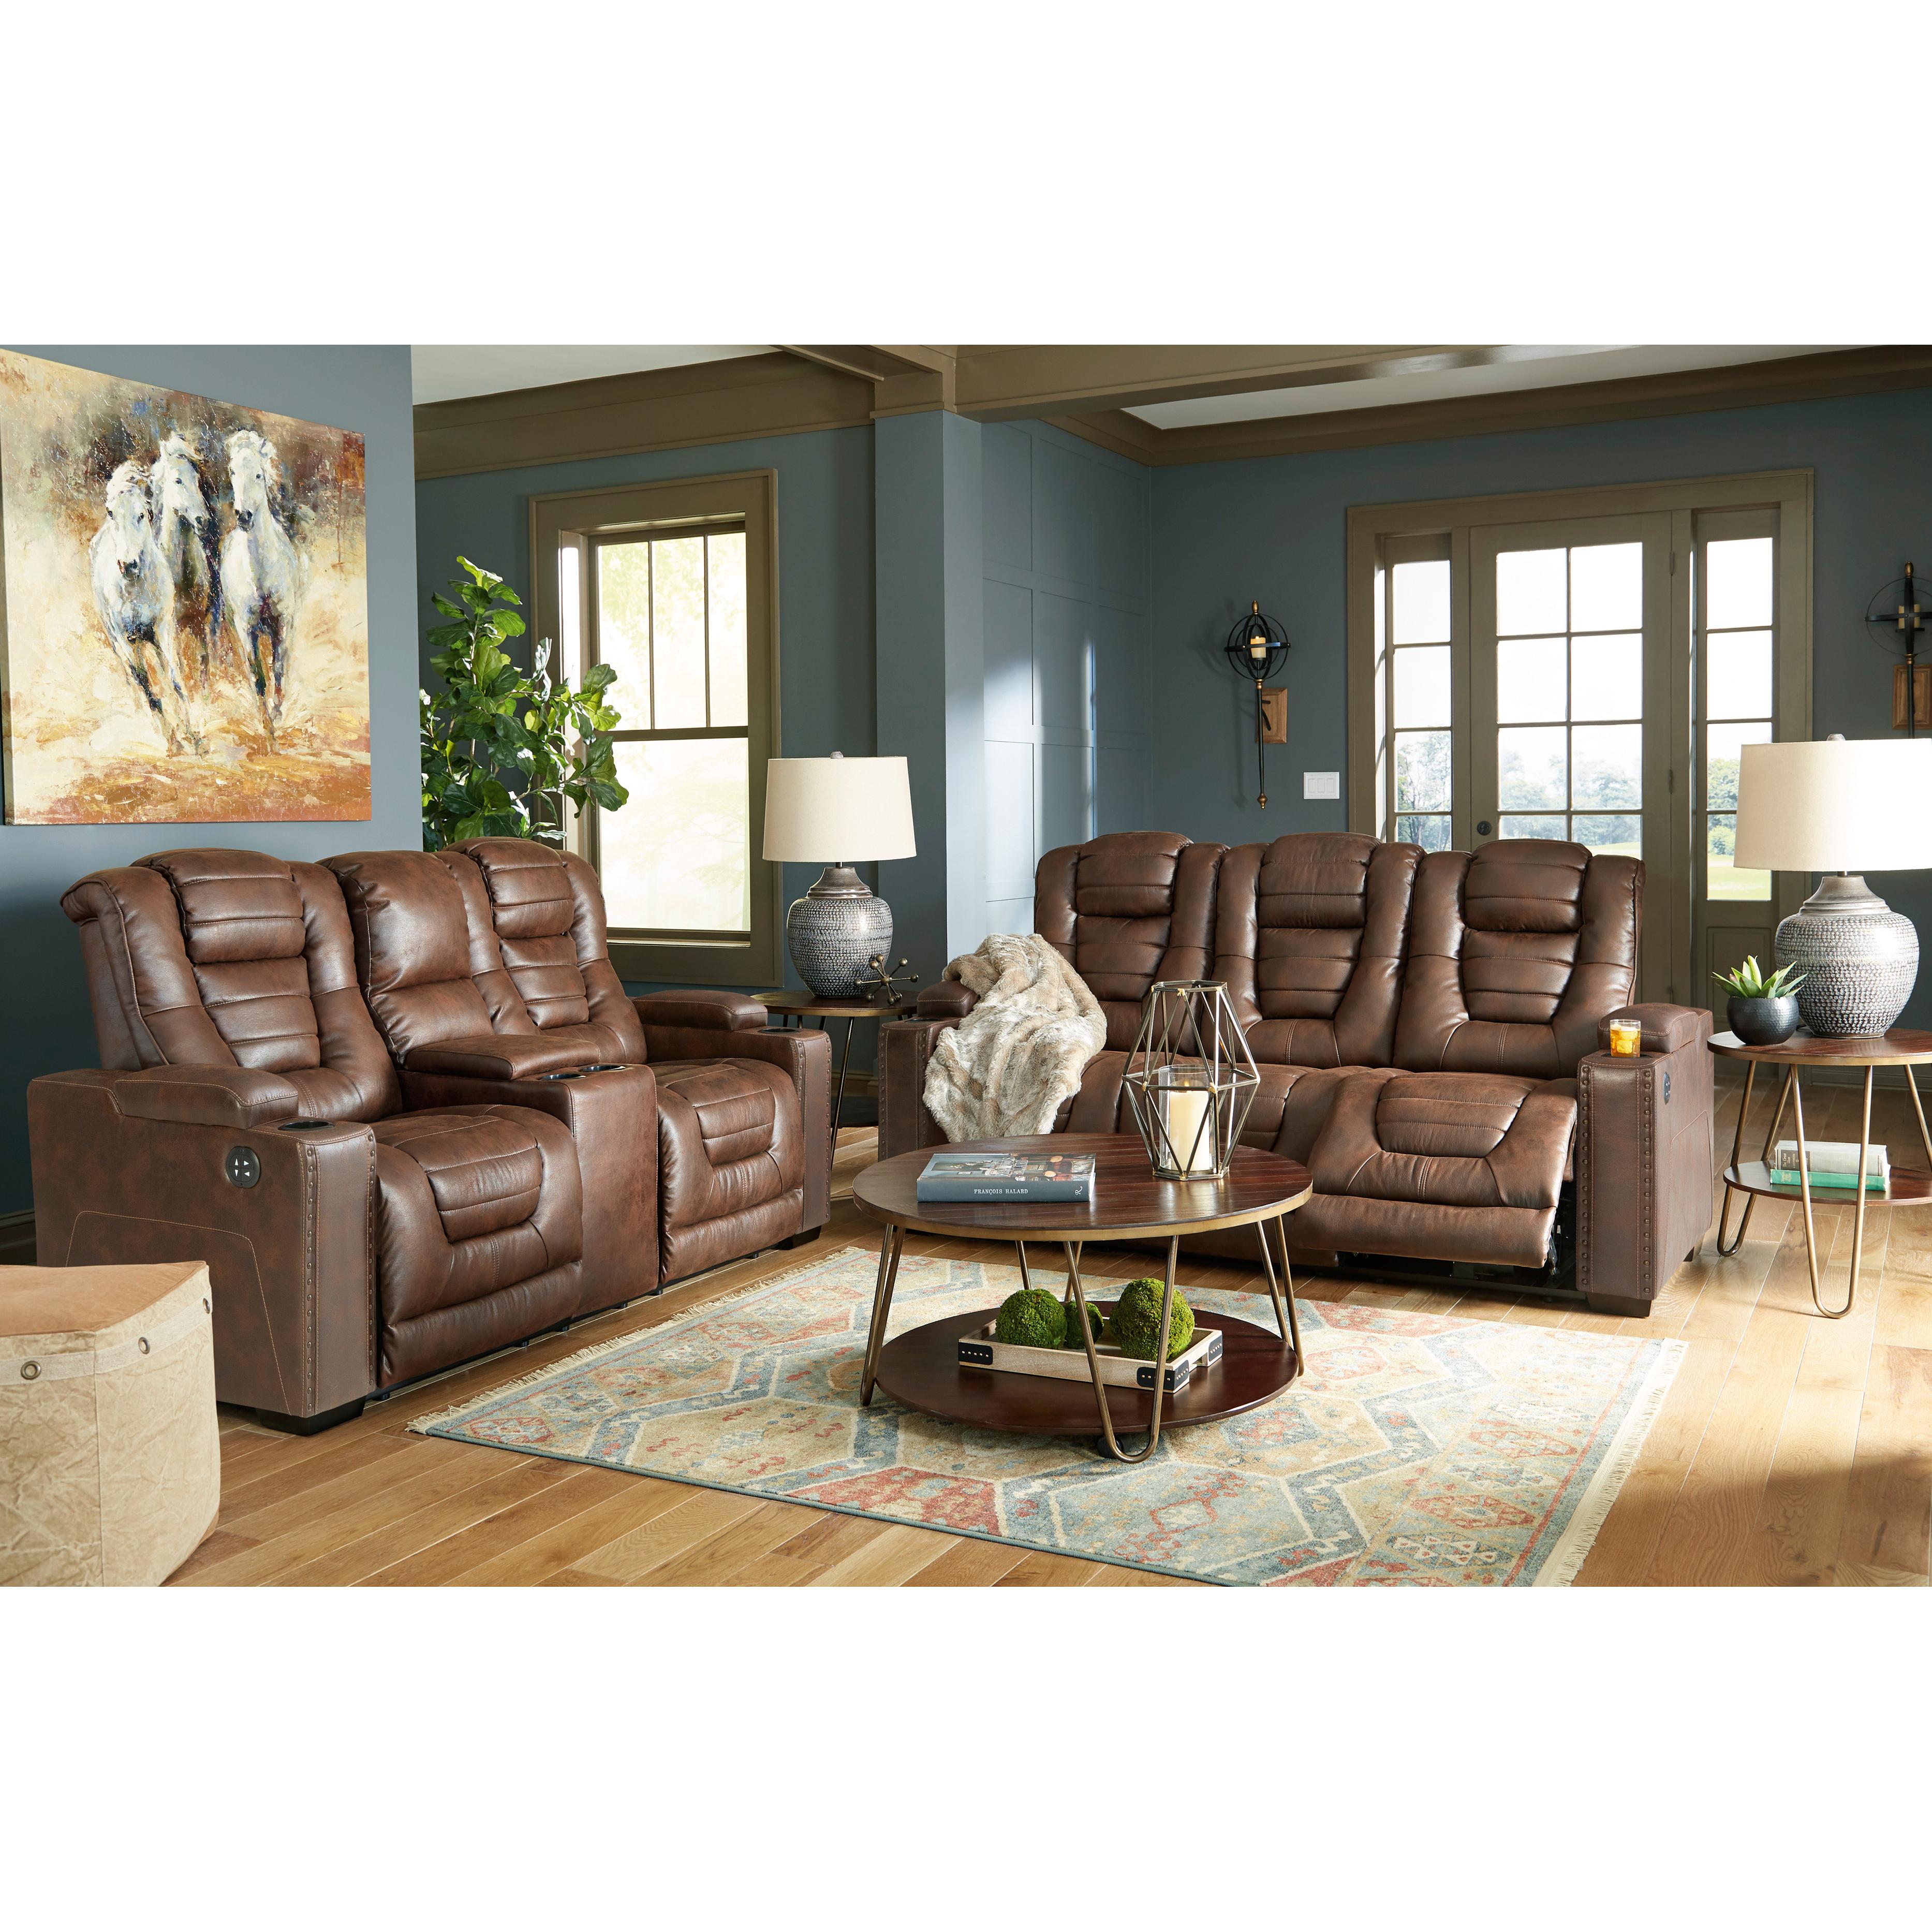 Signature Design by Ashley Owner's Box Power Reclining Leather Look Sofa 2450515